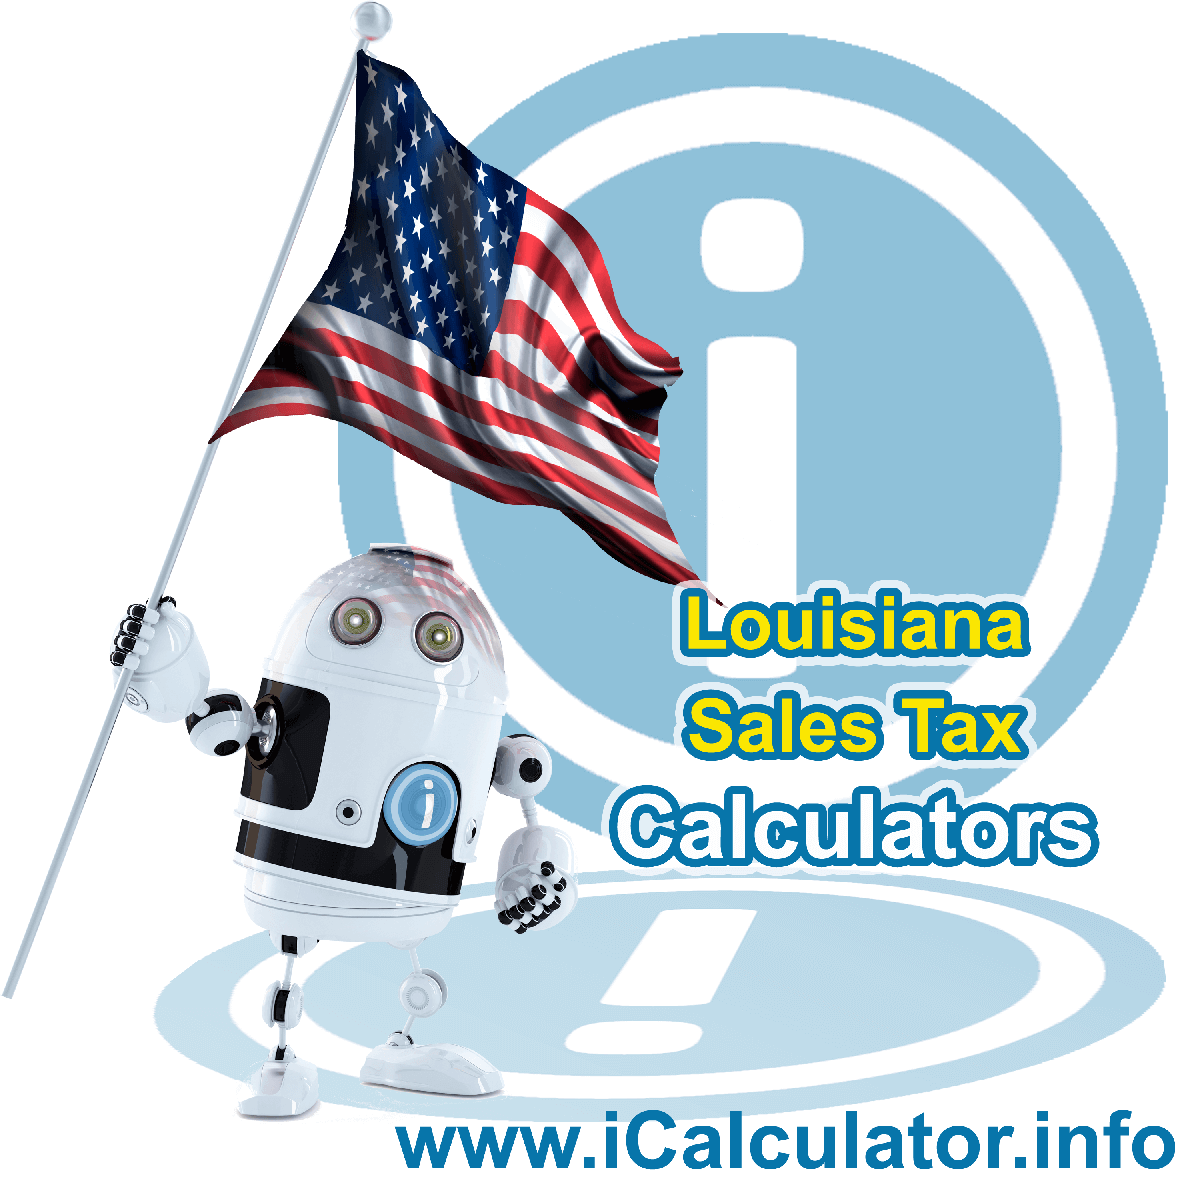 Winnfield Sales Rates: This image illustrates a calculator robot calculating Winnfield sales tax manually using the Winnfield Sales Tax Formula. You can use this information to calculate Winnfield Sales Tax manually or use the Winnfield Sales Tax Calculator to calculate sales tax online.